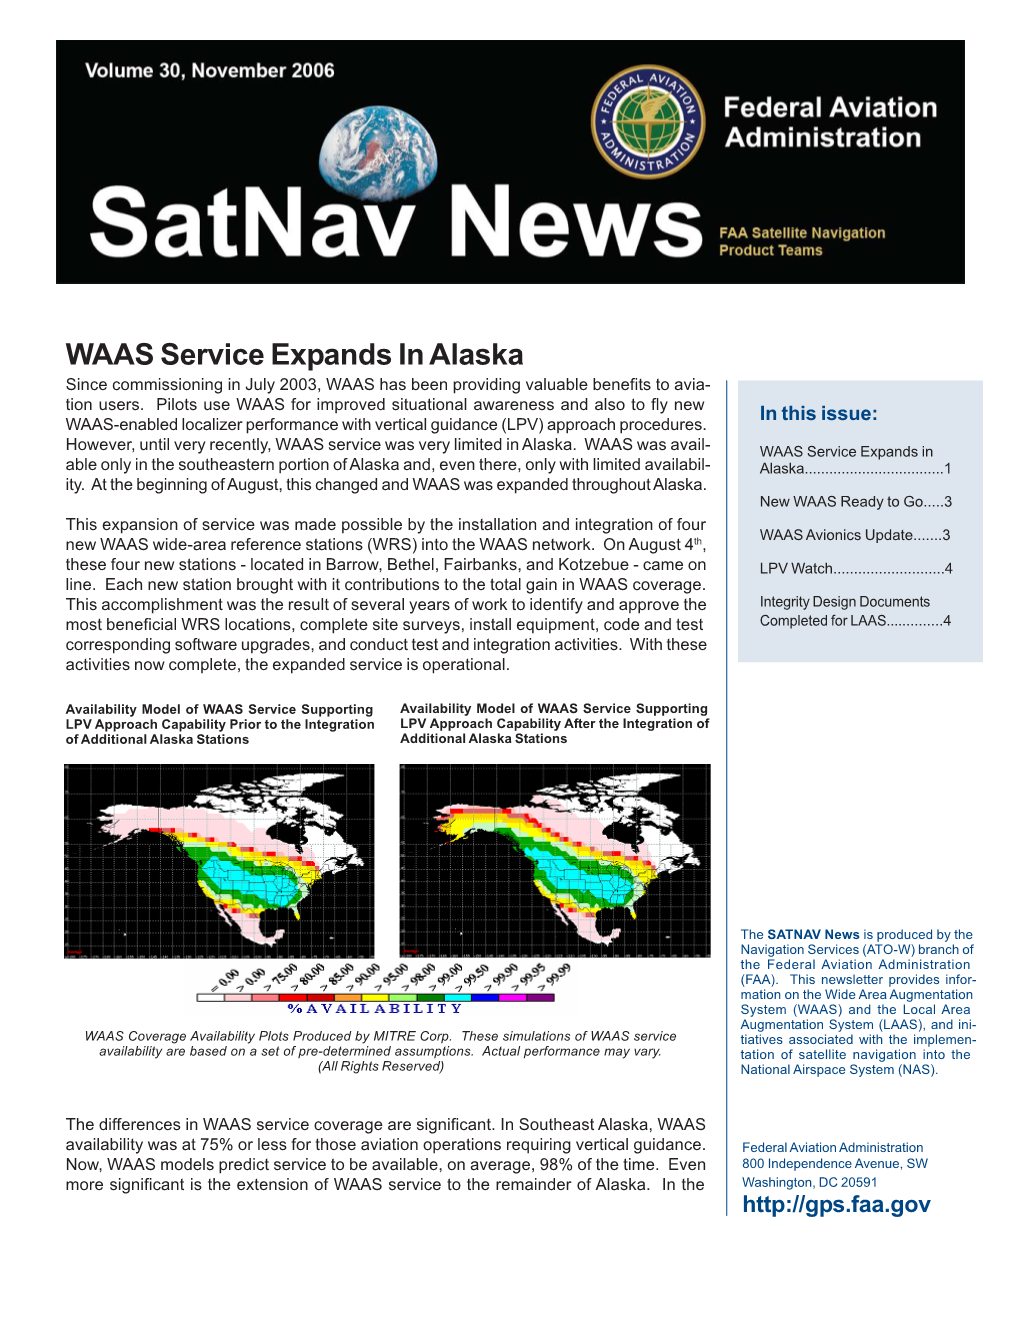 WAAS Service Expands in Alaska Since Commissioning in July 2003, WAAS Has Been Providing Valuable Benefits to Avia- Tion Users